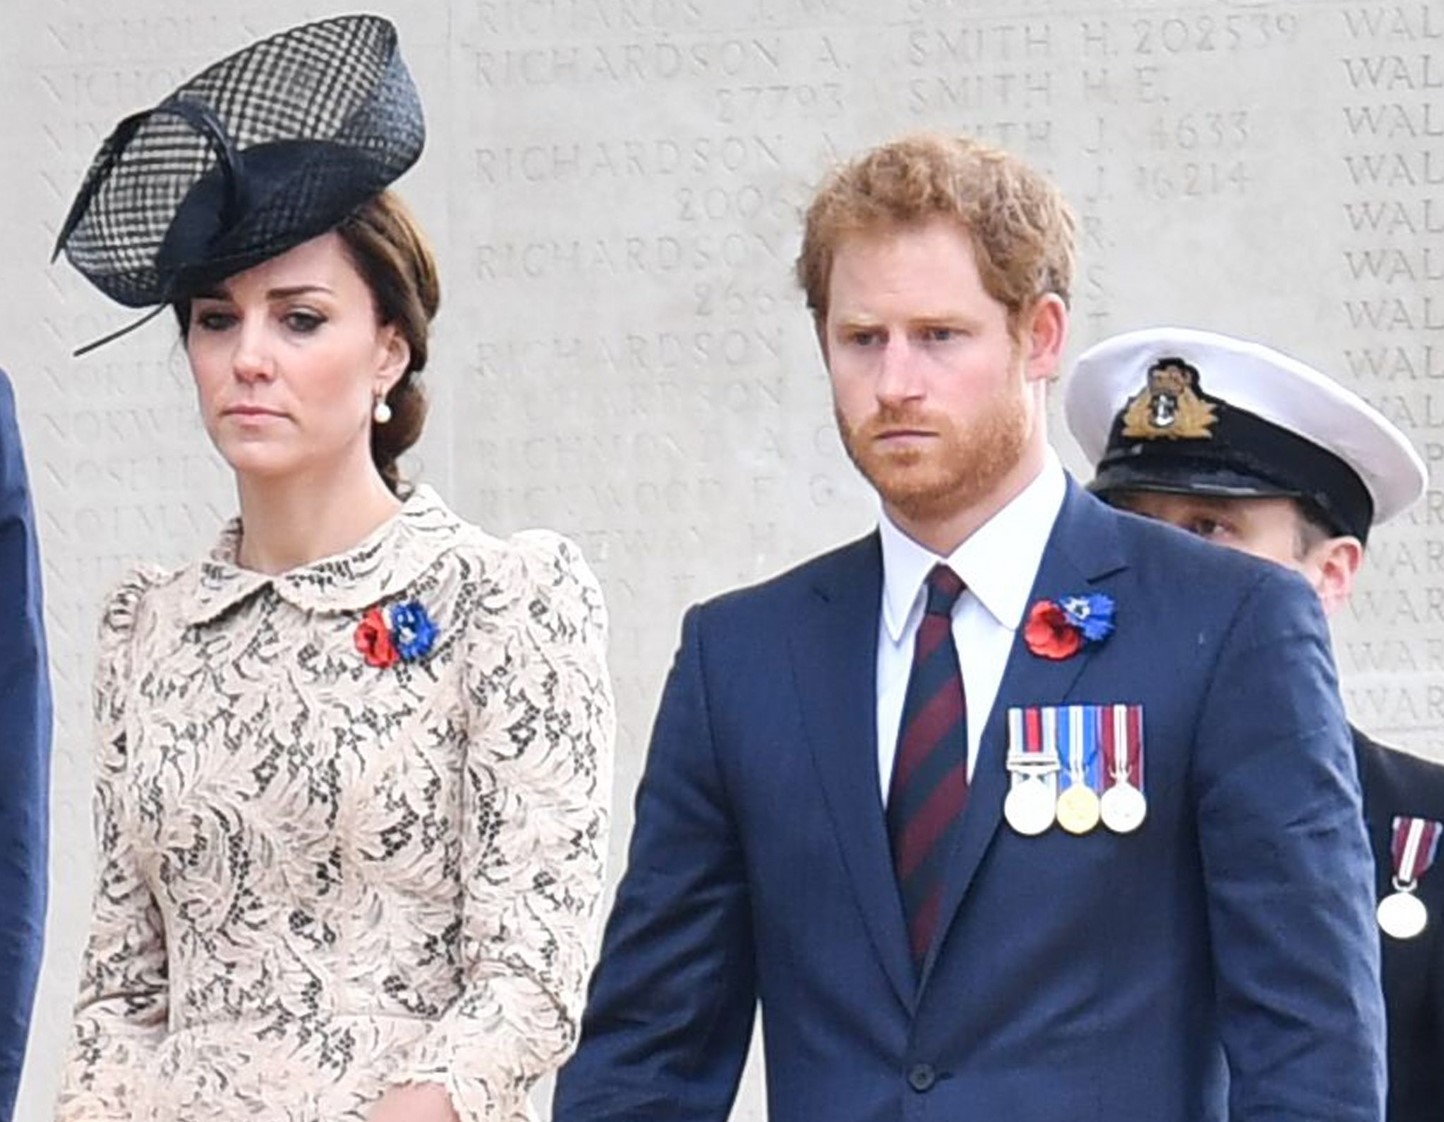 Kate Middleton and Prince Harry looking somber at the commemoration of the Battle of the Somme